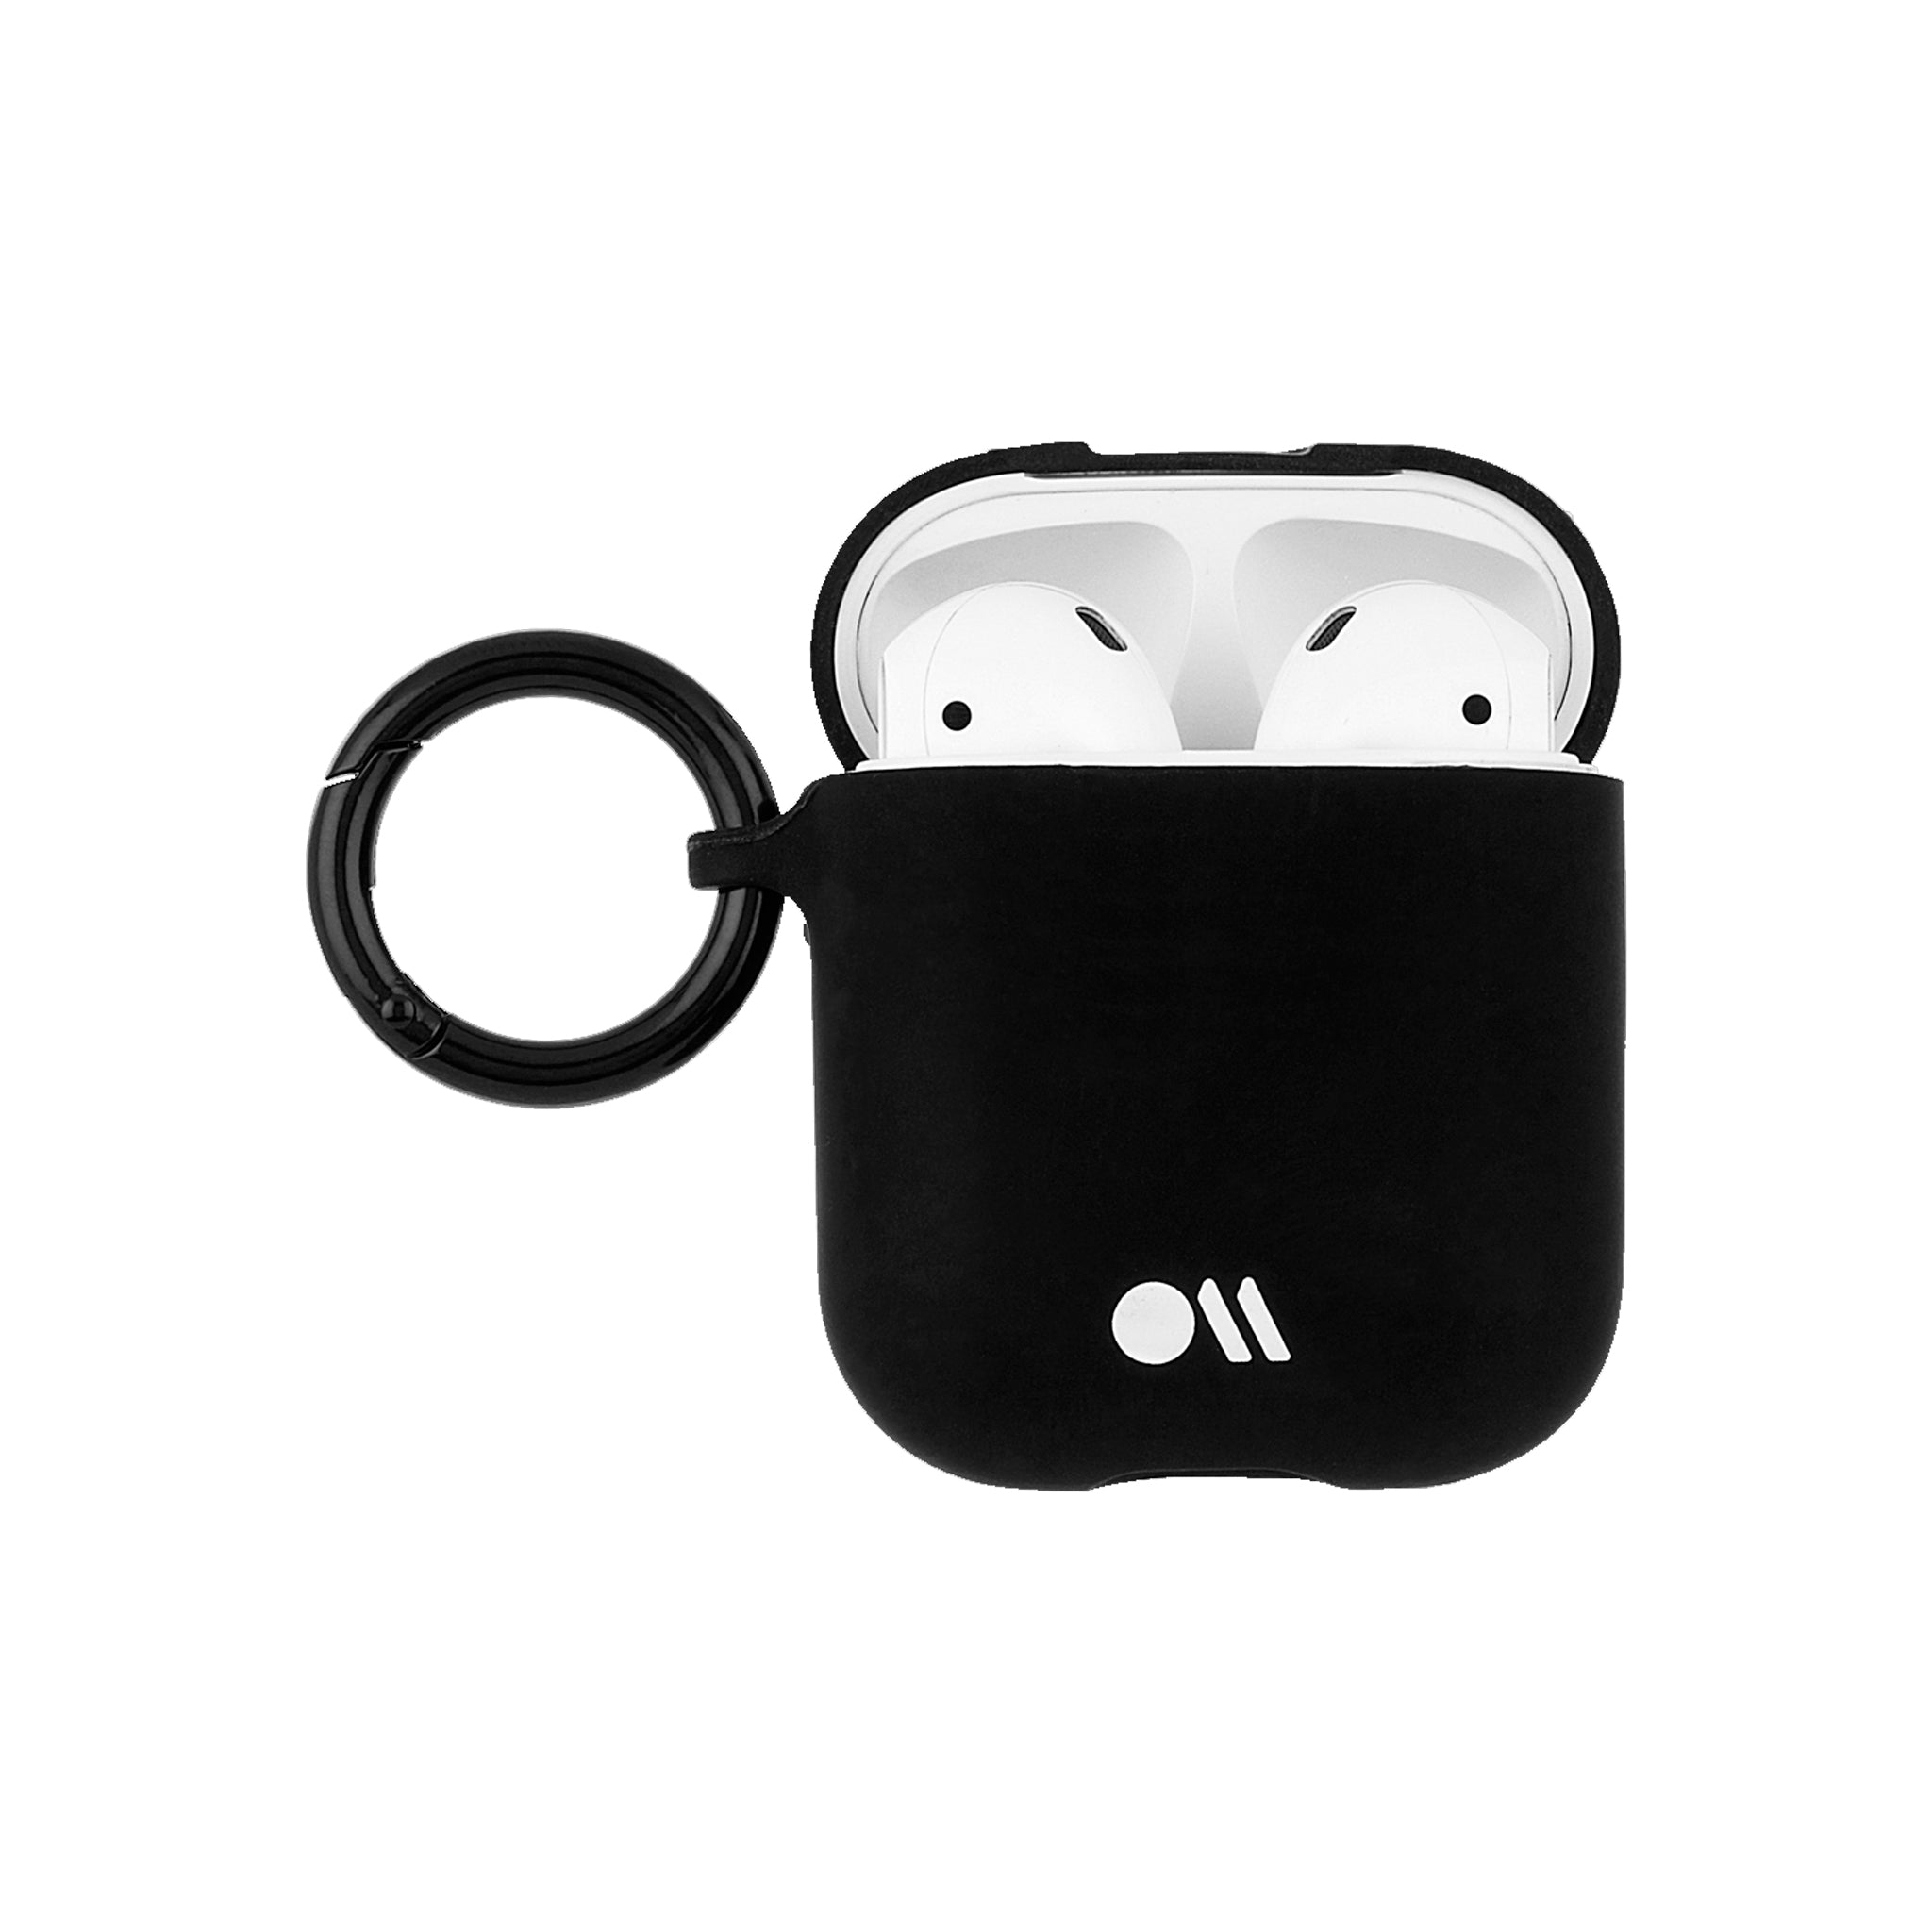 Case-mate - Hook Ups Case With Neck Strap For Apple Airpods - Black